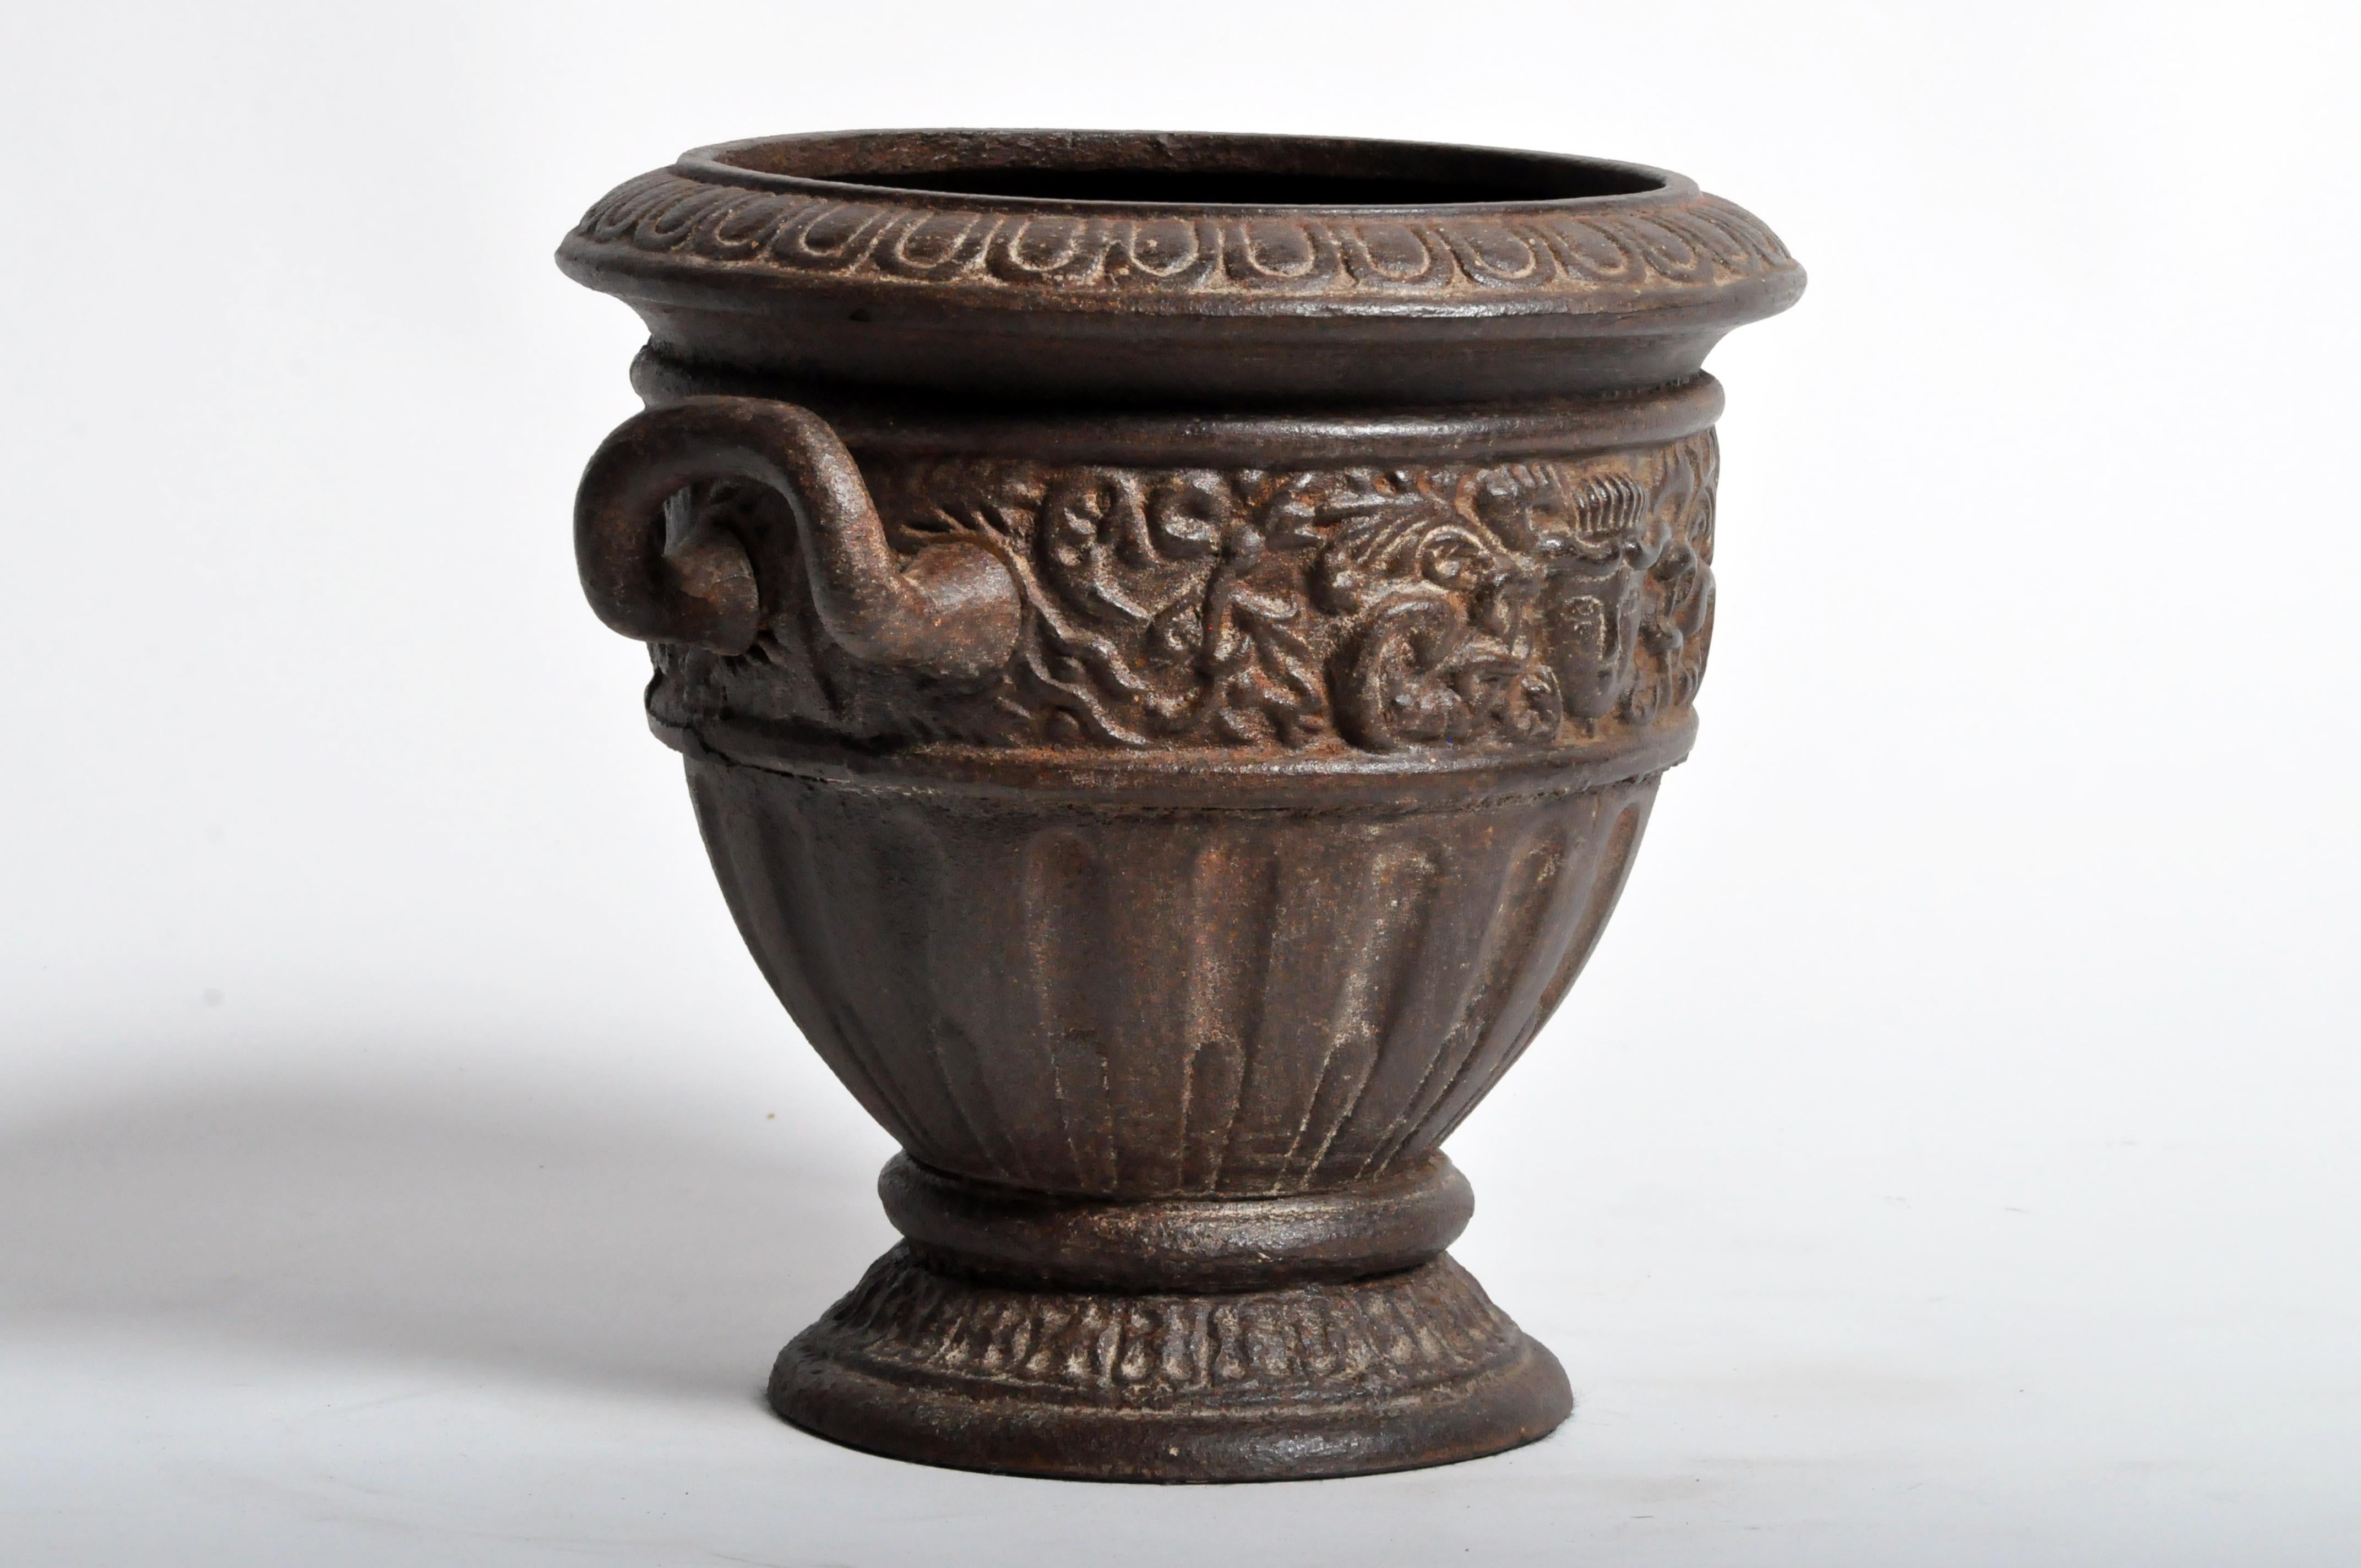 A flower pot from India, made from cast iron, circa 1960. The pot features two handles and its original patina.